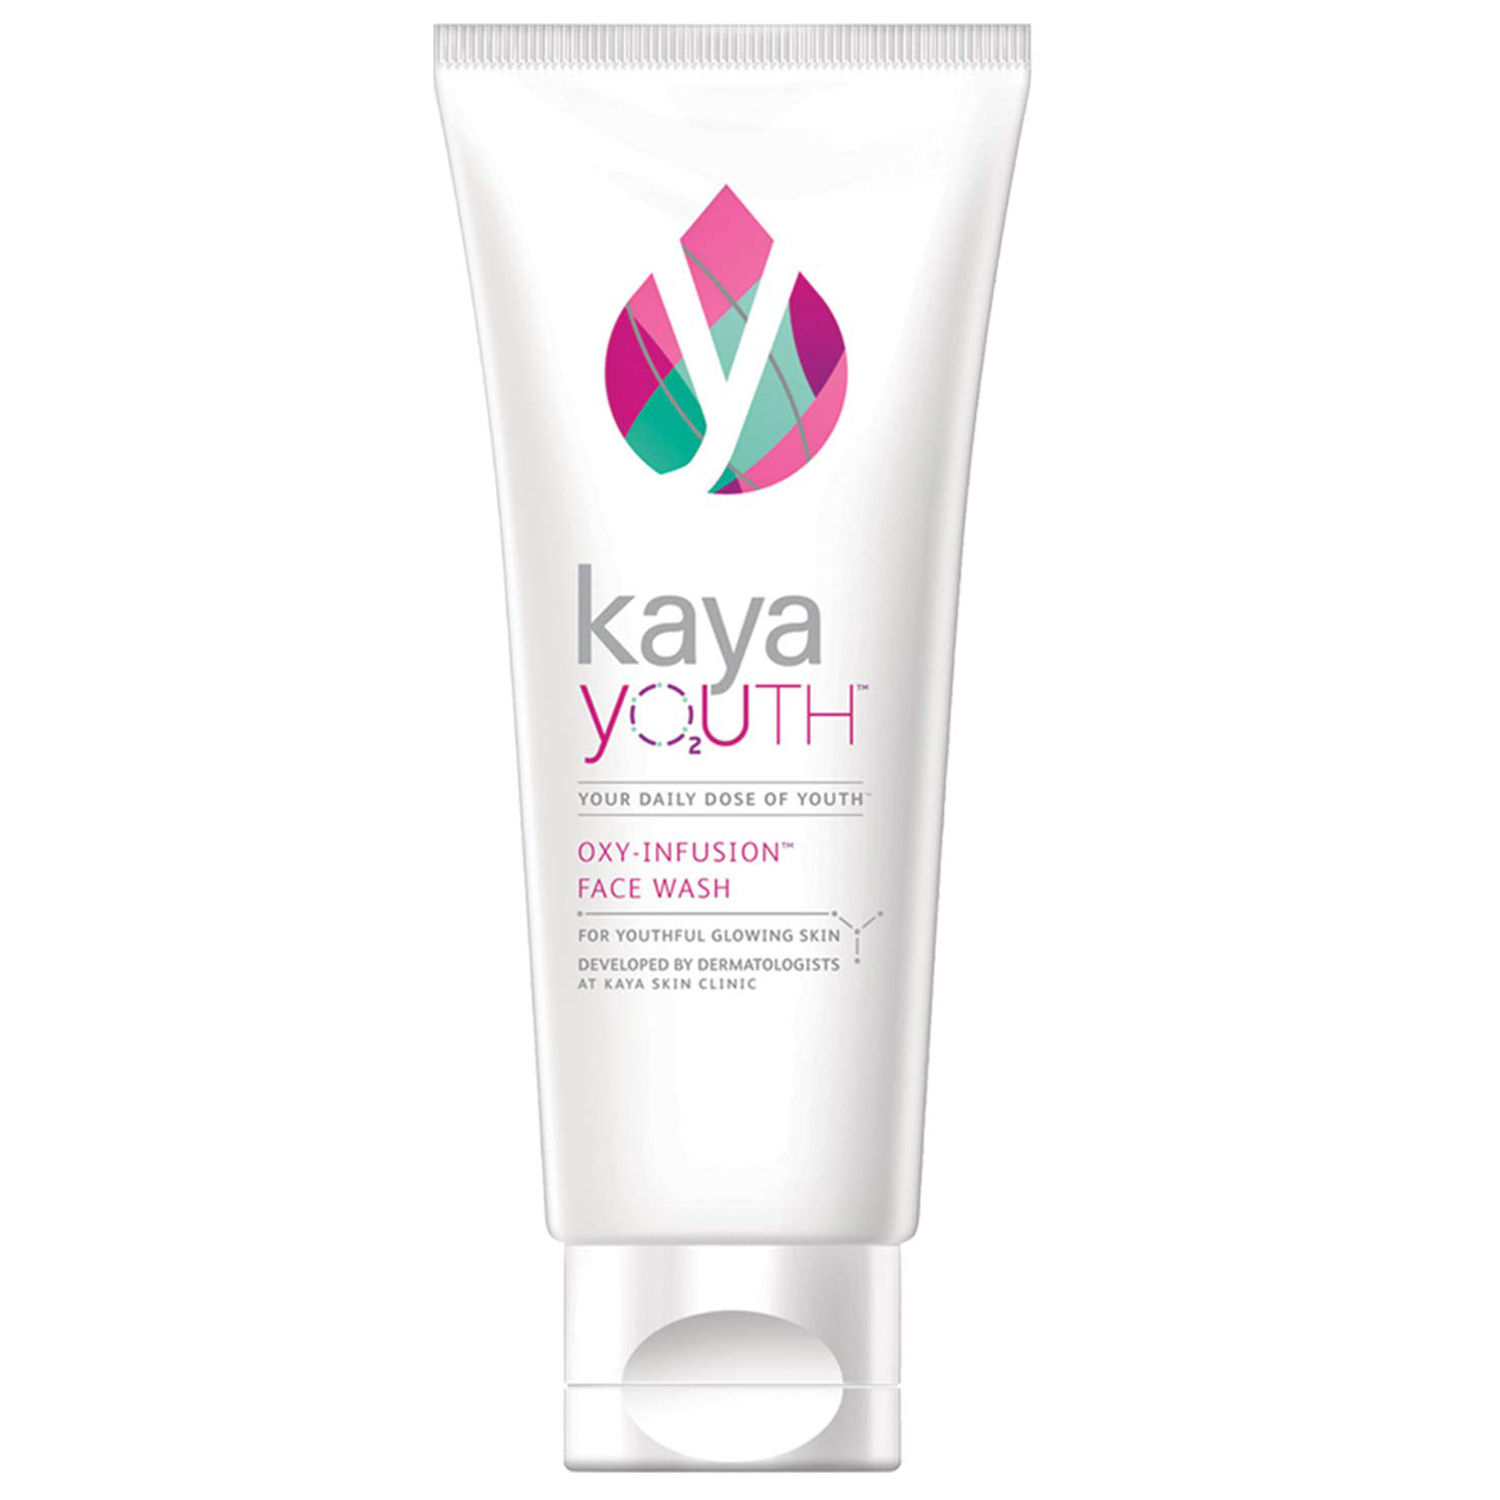 Buy Kaya Youth Oxy-Infusion Face Wash, 100 gm Online